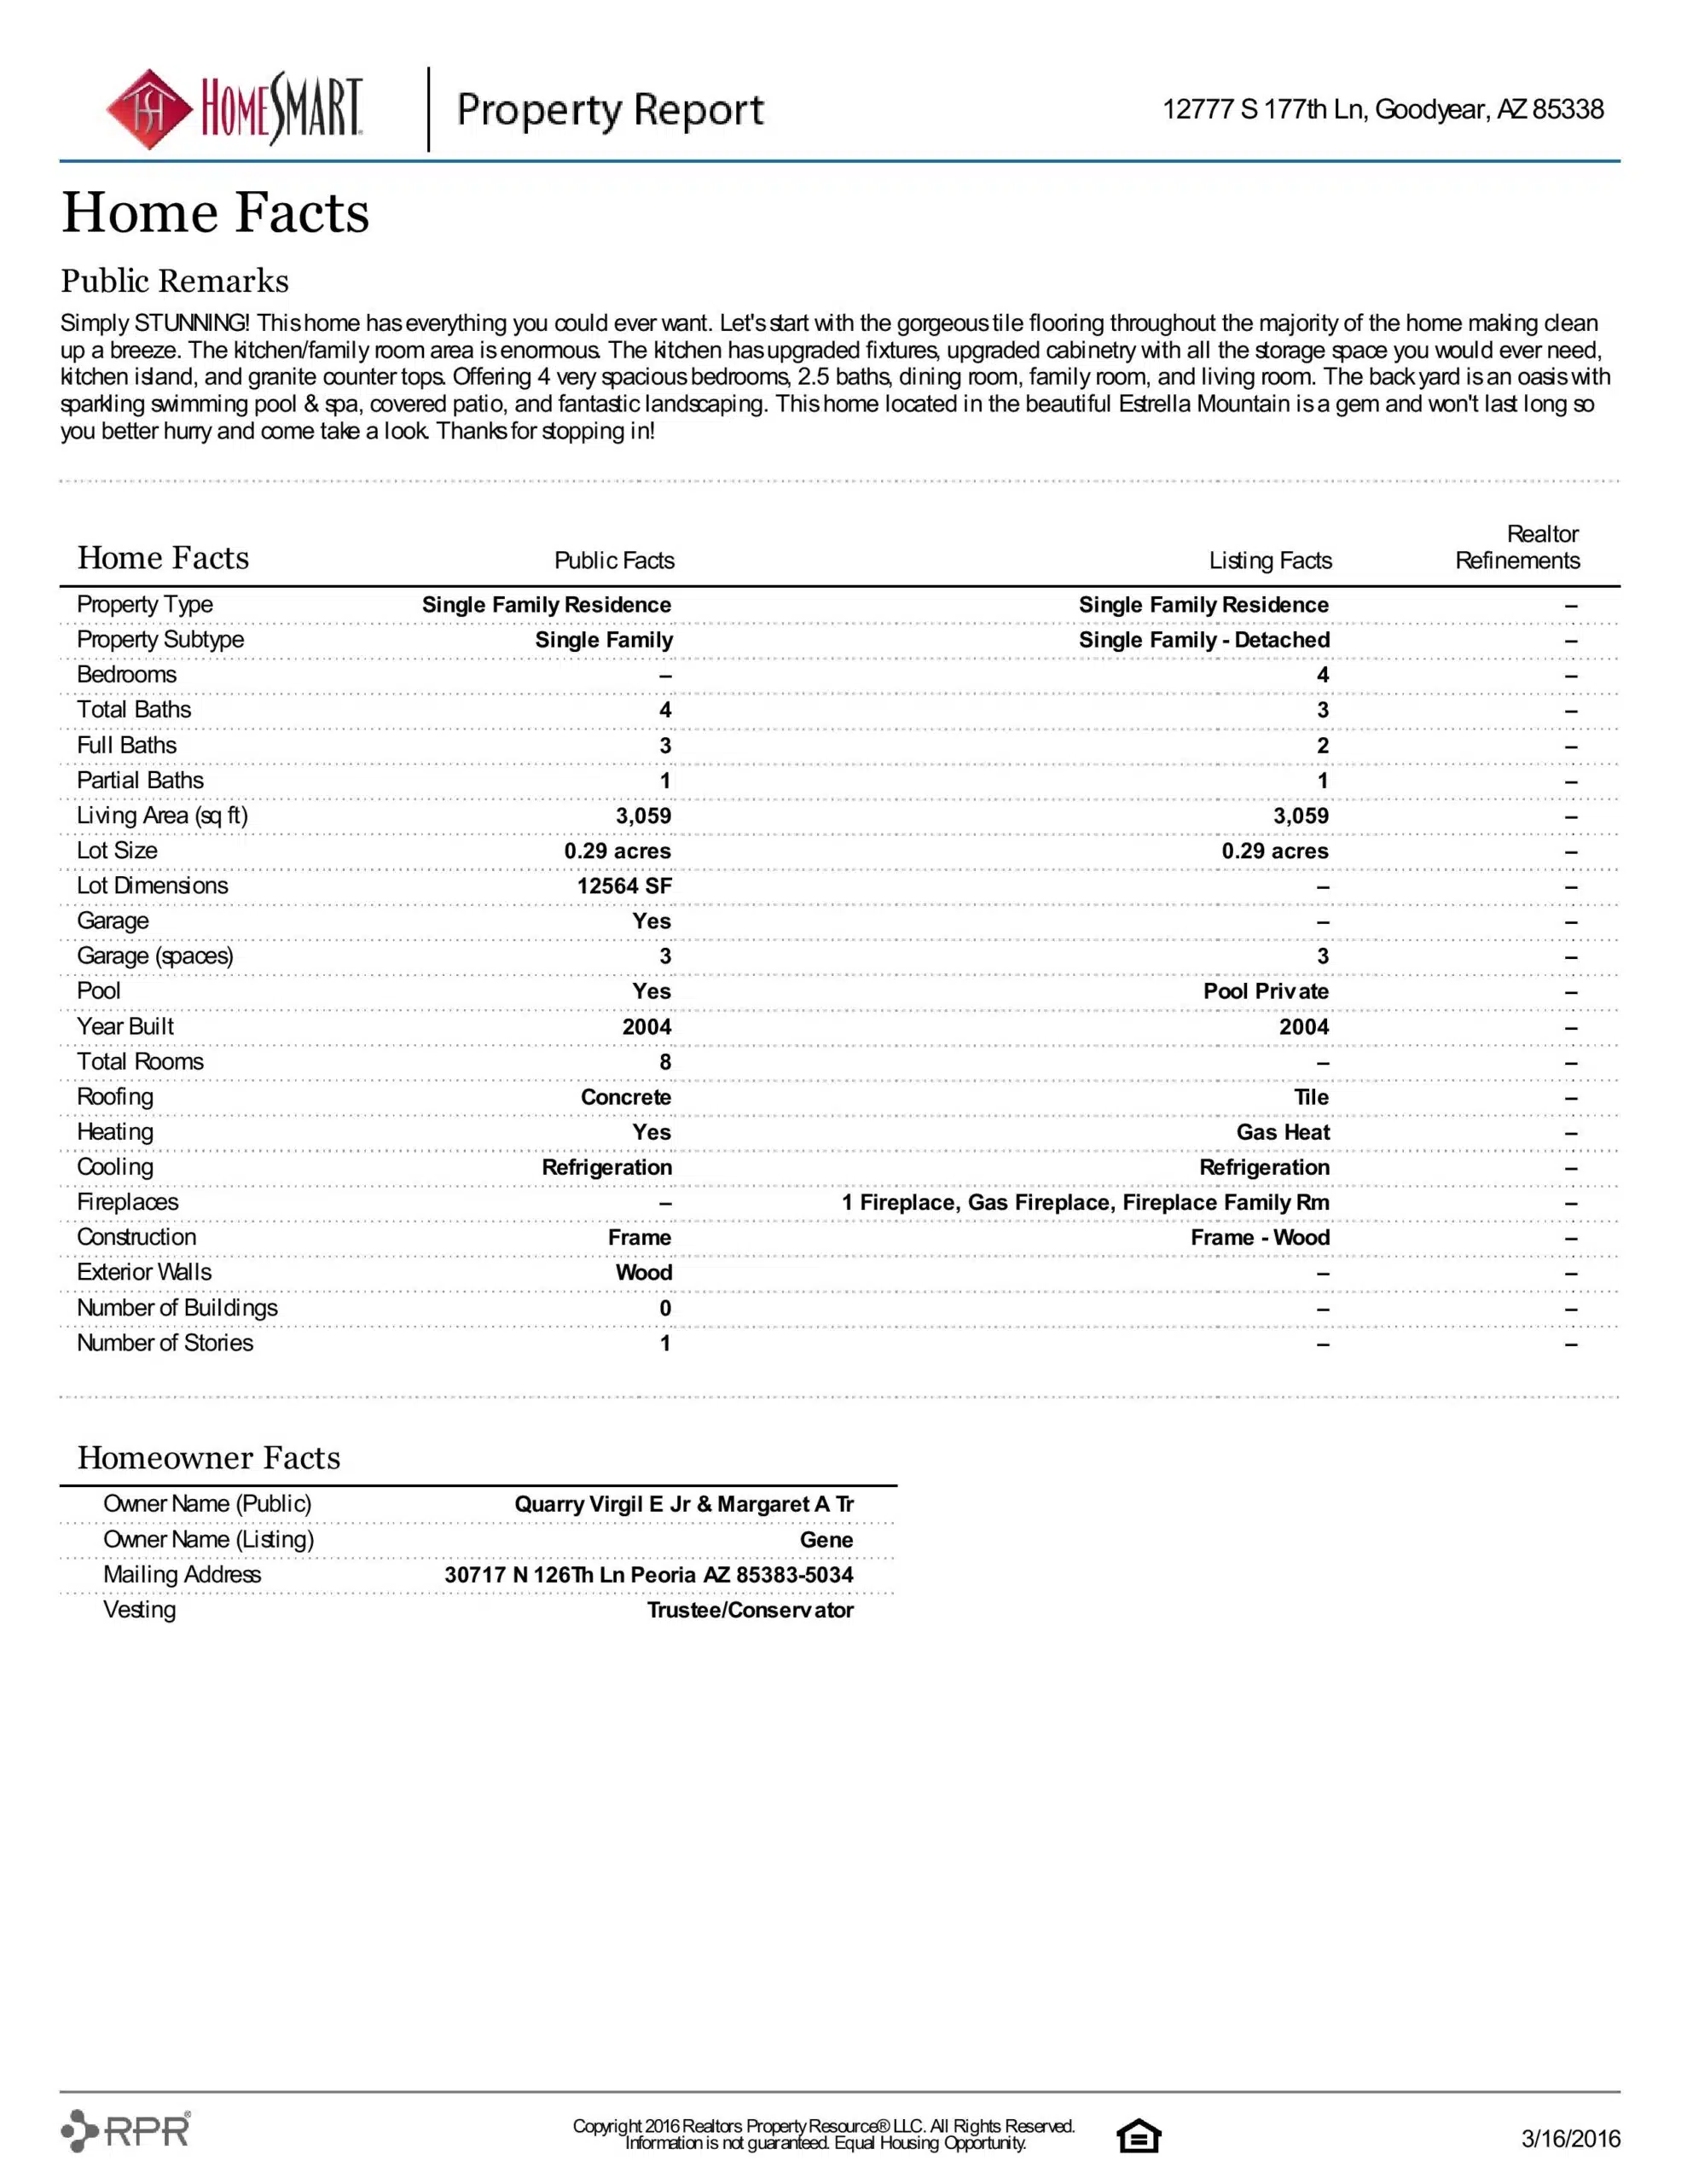 12777 S 177TH LANE PROPERTY REPORT-page-003